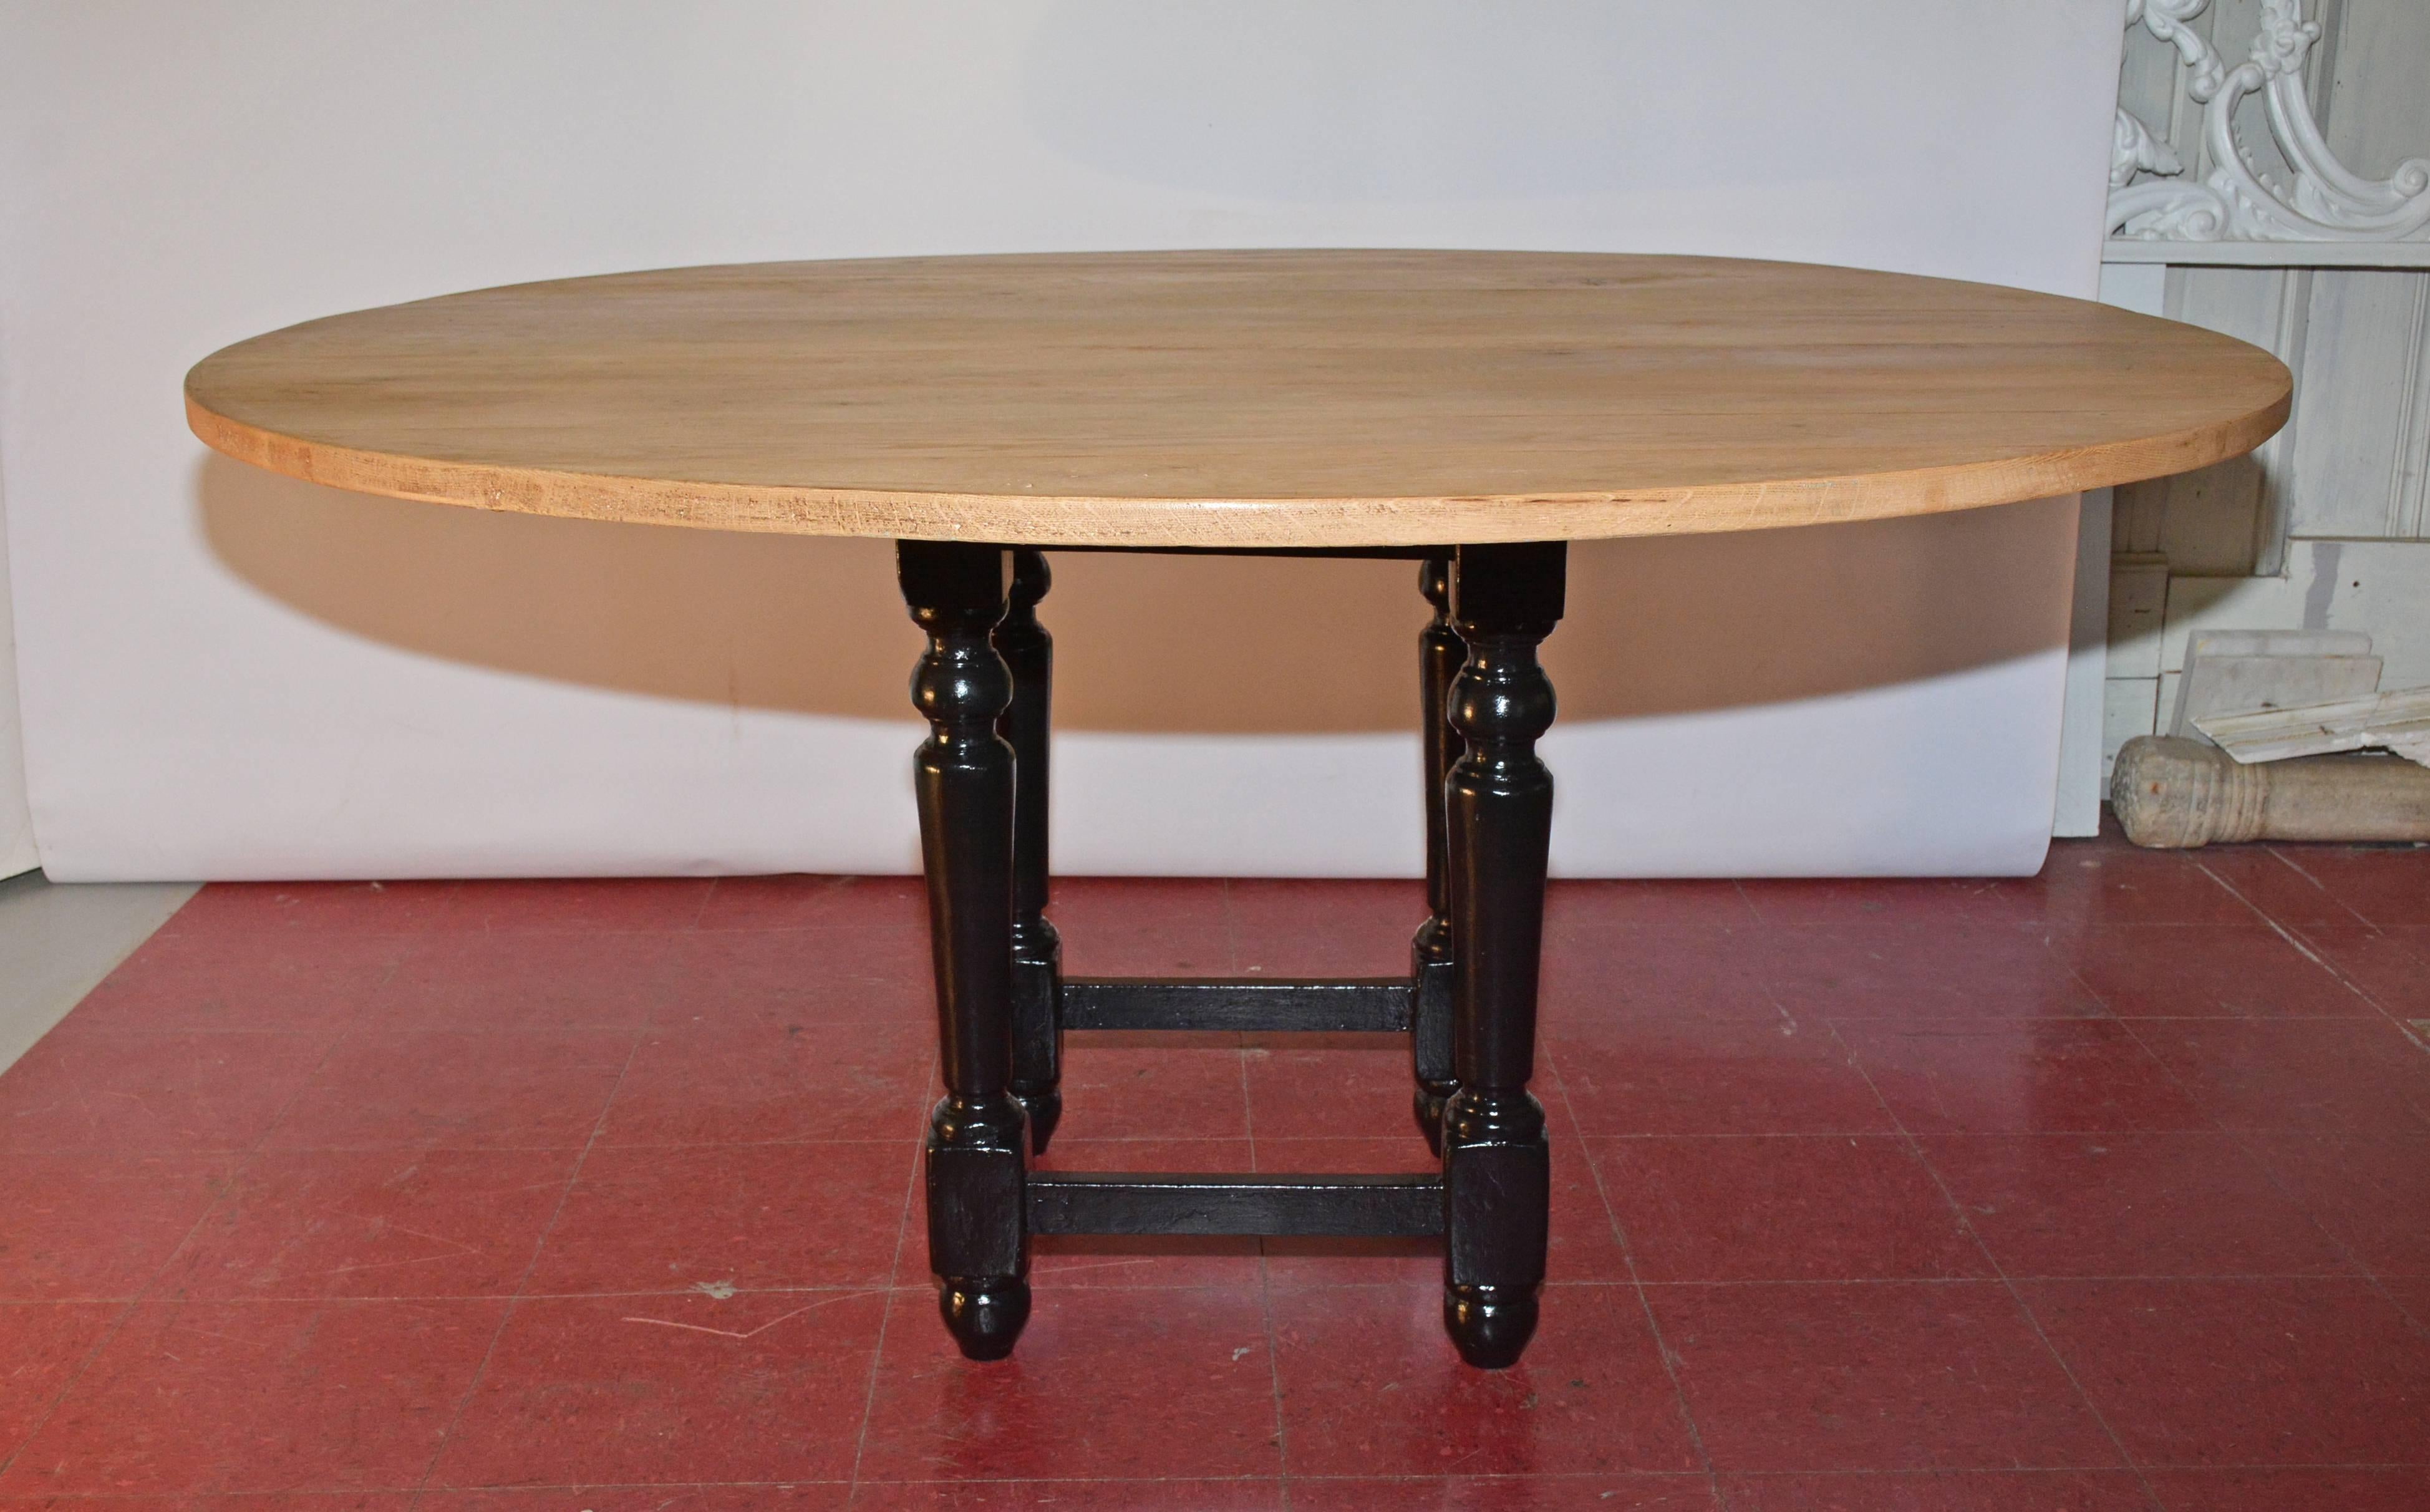 The round teak wood top of this dining table has been married to an antique pedestal cage base painted black and will seat up to eight people. The base has stretchers for securing the round legs and measures: 18.50